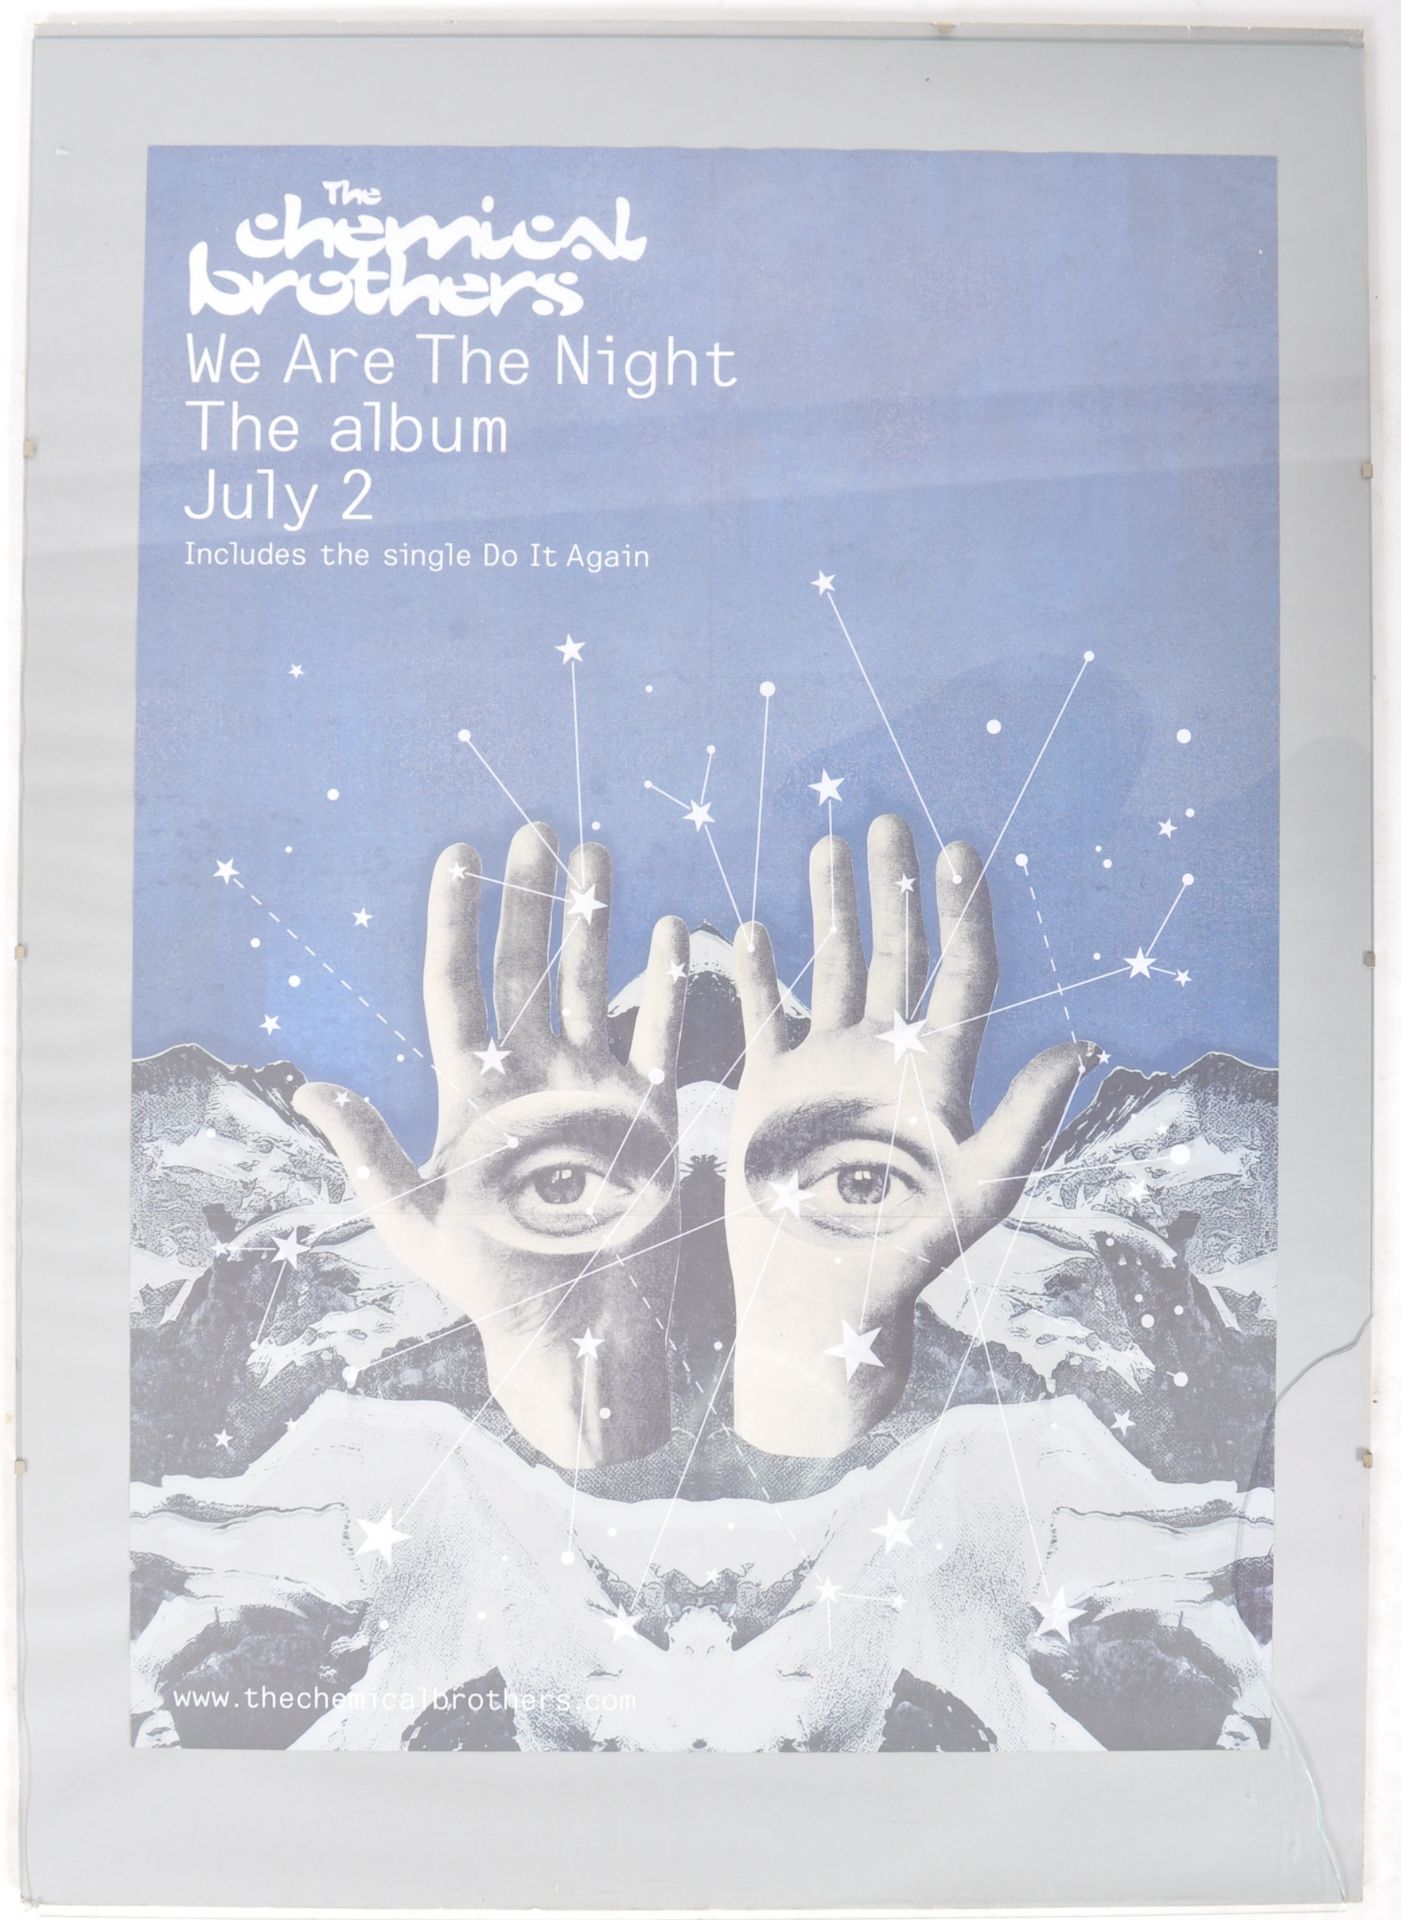 THE CHEMICAL BROTHERS - PROMOTIONAL MUSIC POSTER